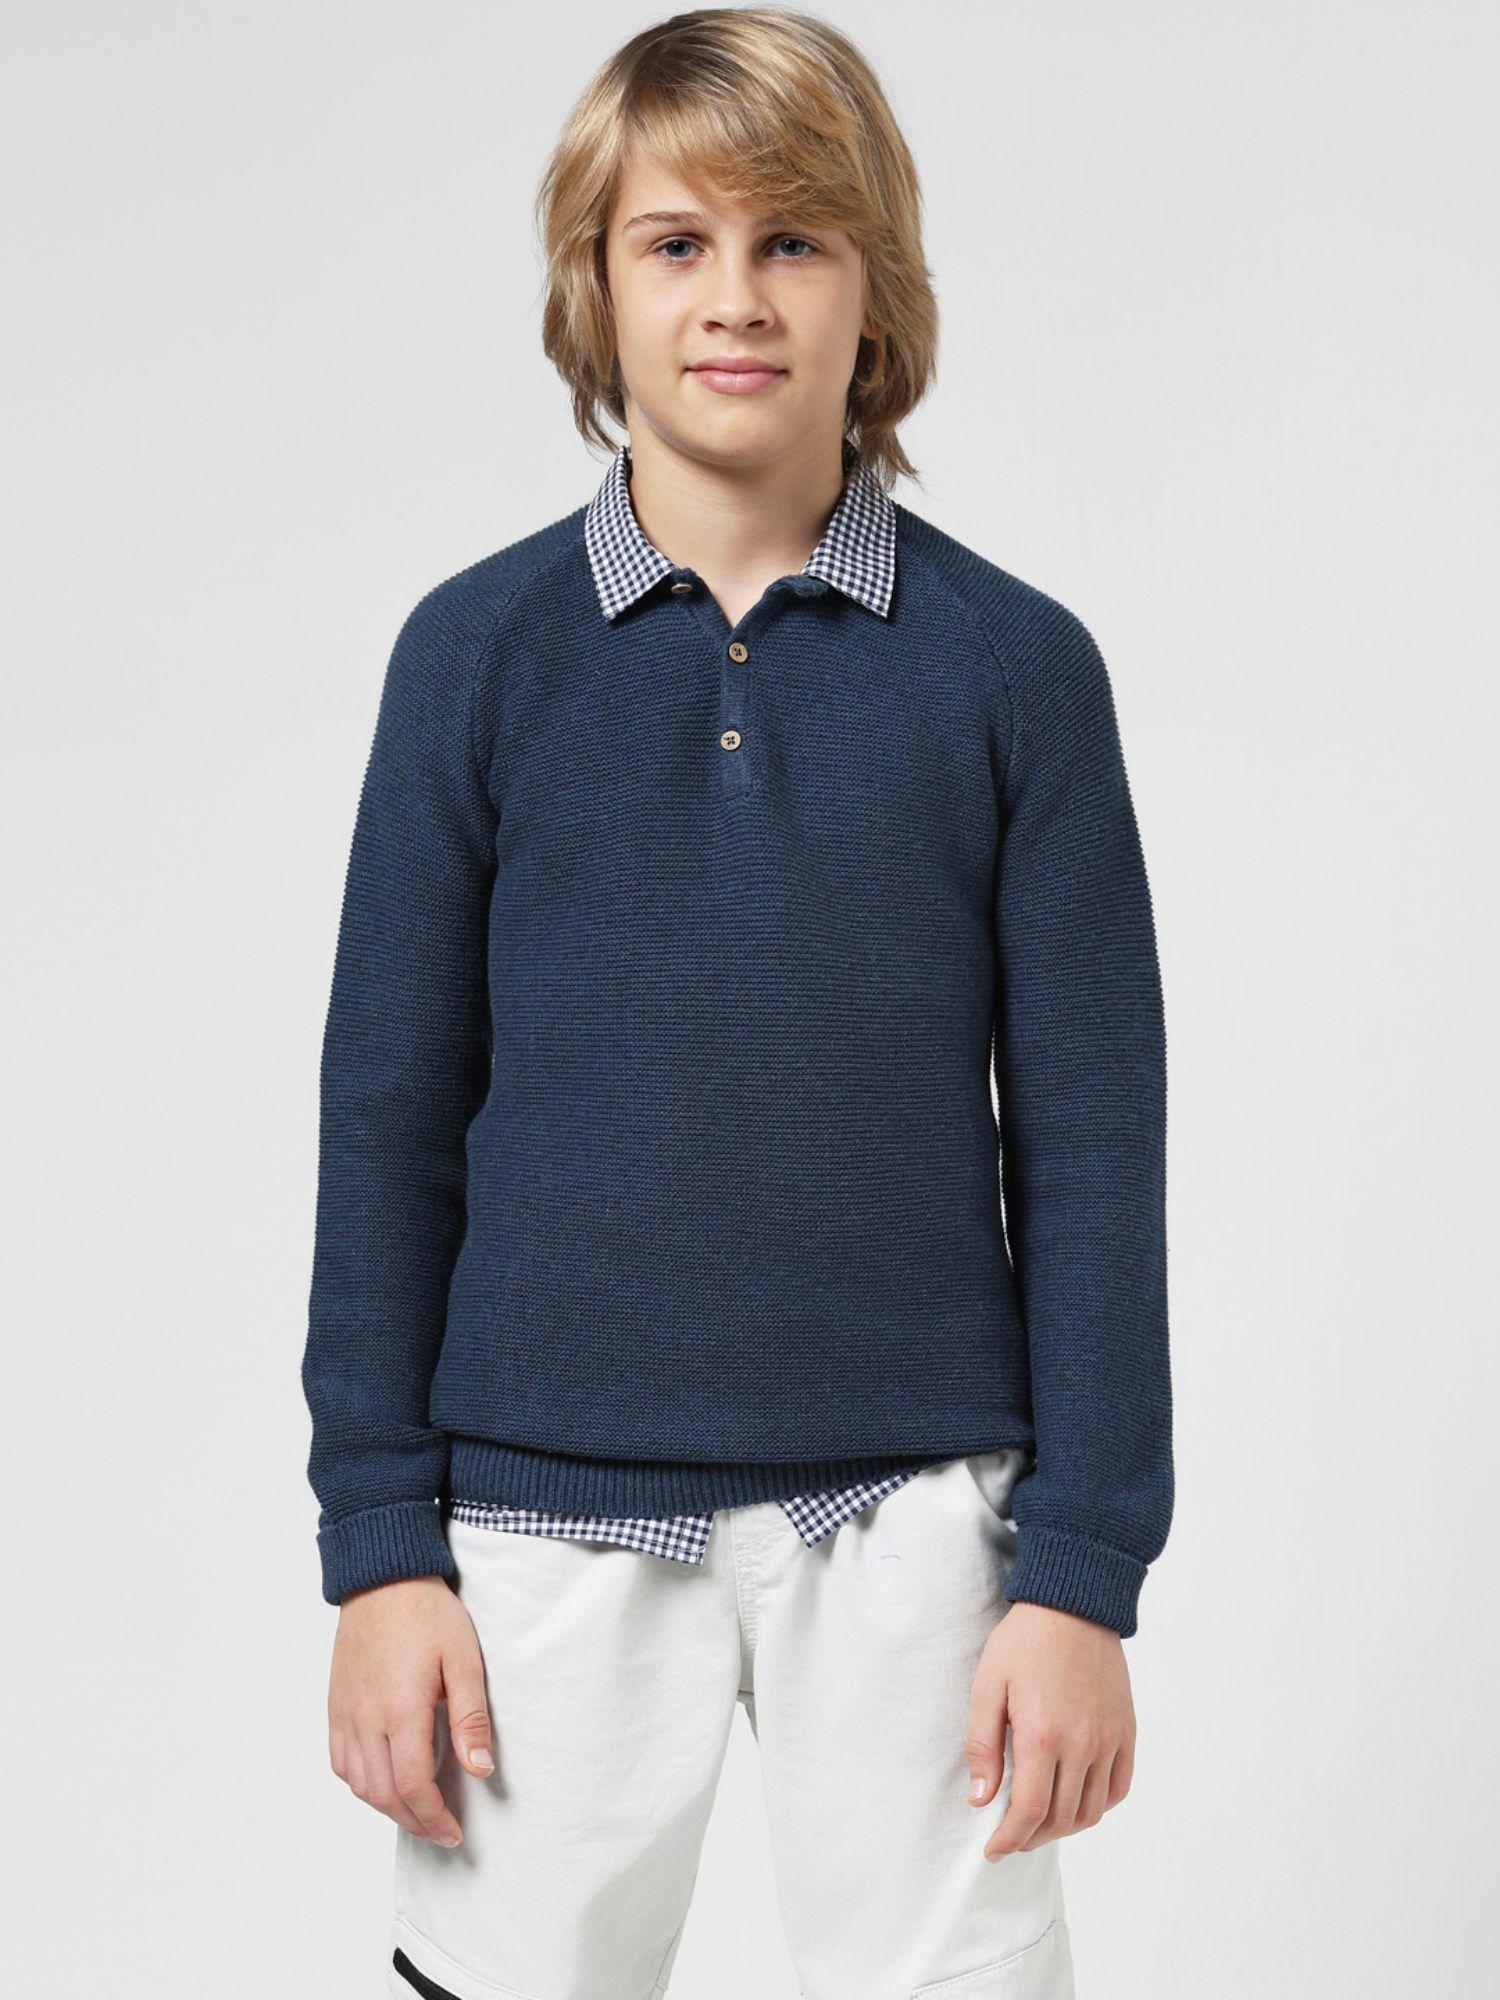 boys-solid-navy-blue-sweater